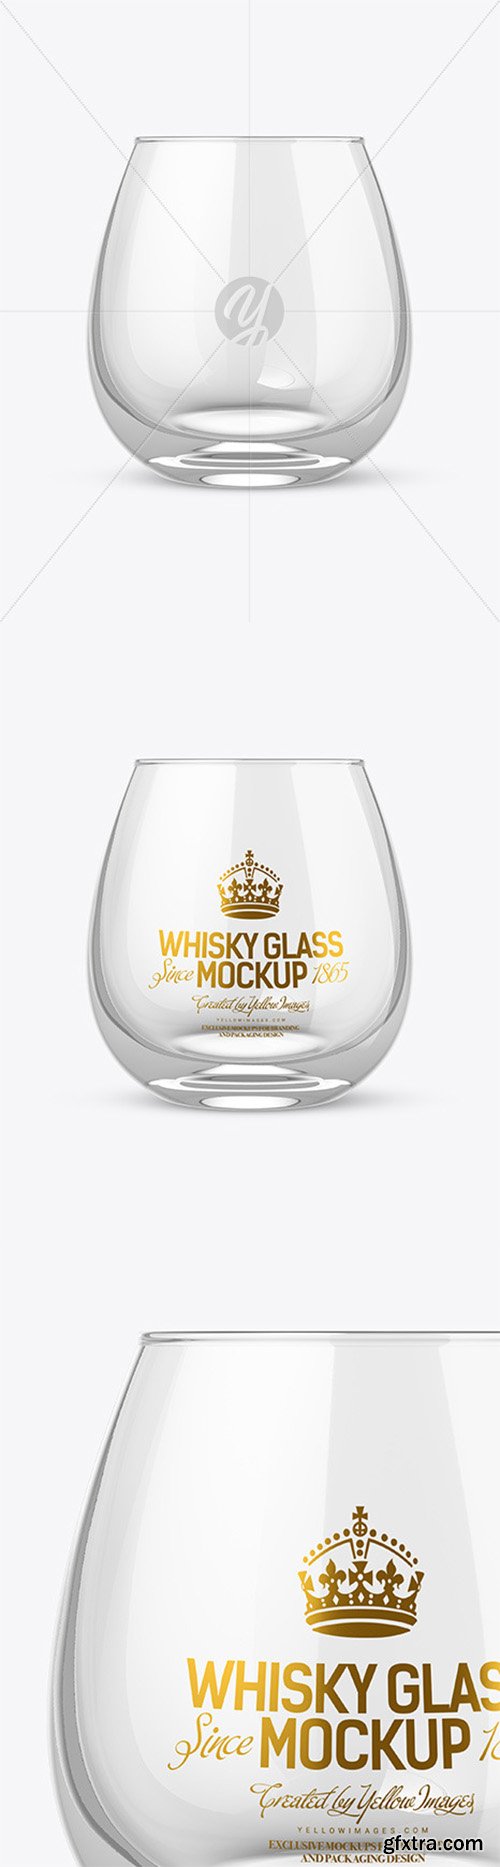 Clear Whisky Glass Mockup 57165